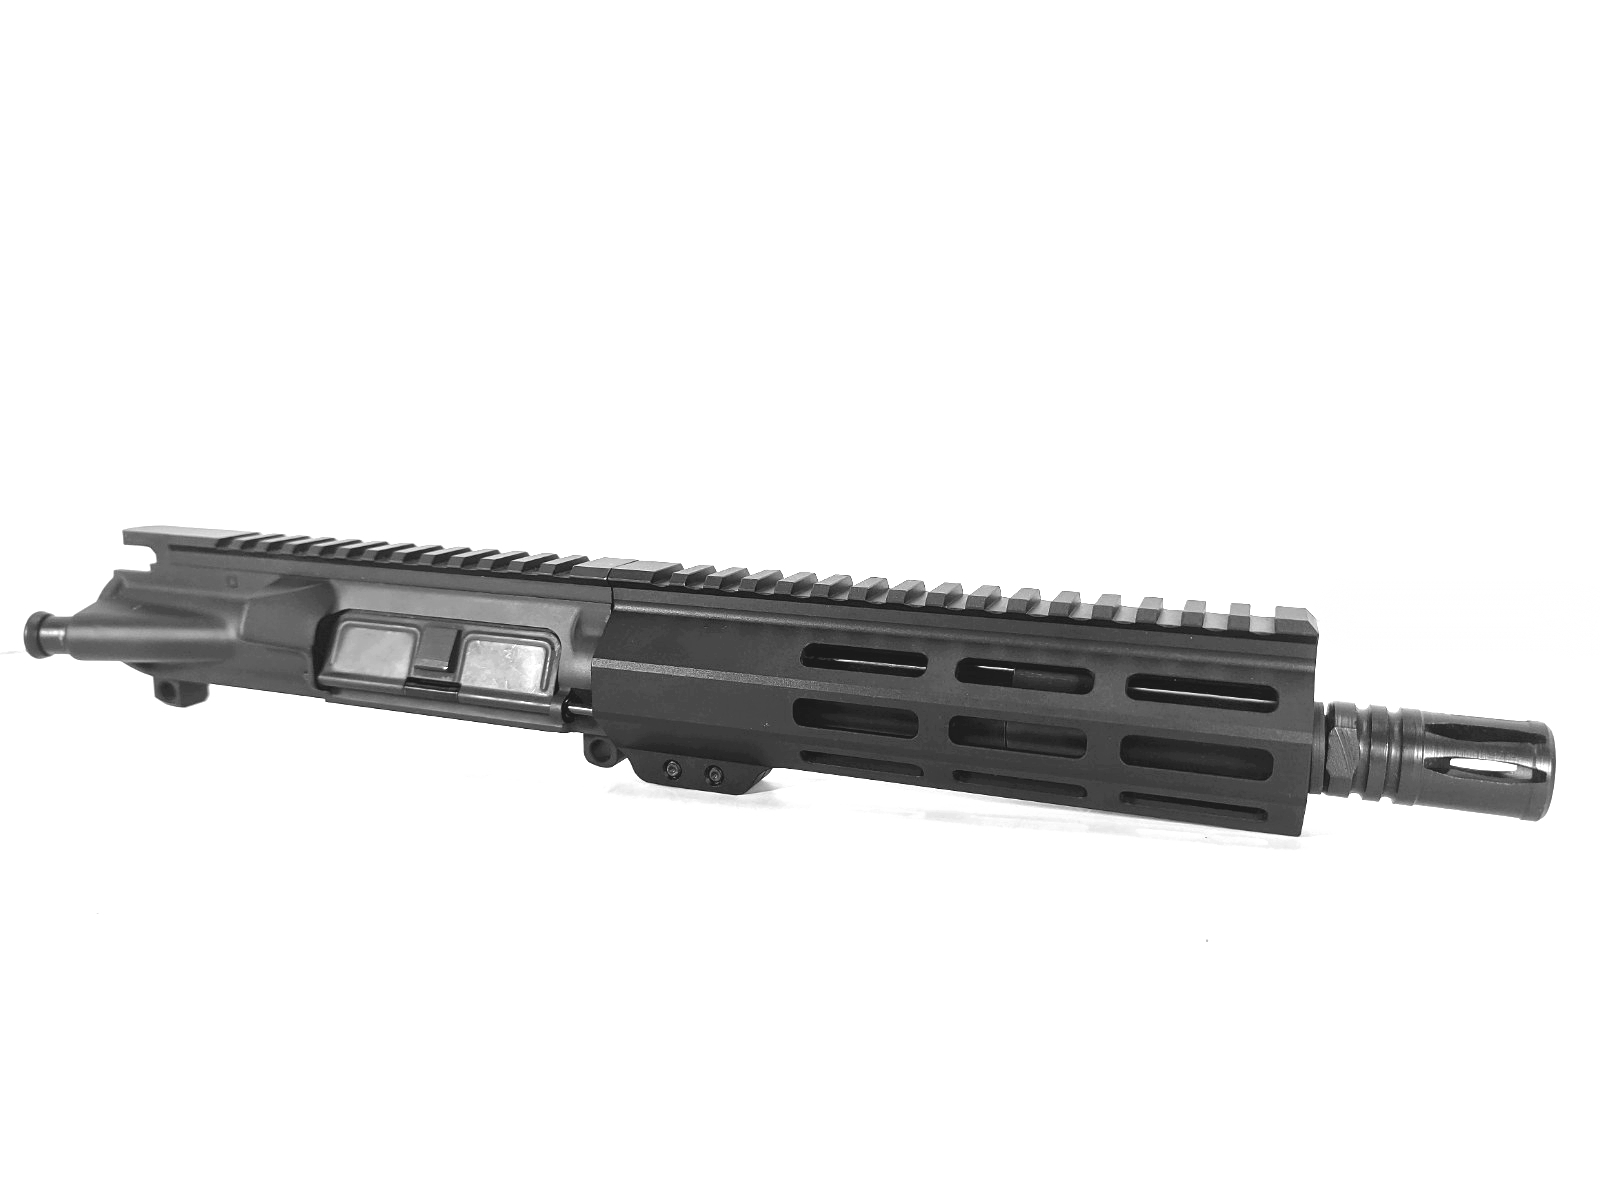 7.5 inch 300 Blackout Nitride Upper | Pro2A Tactical